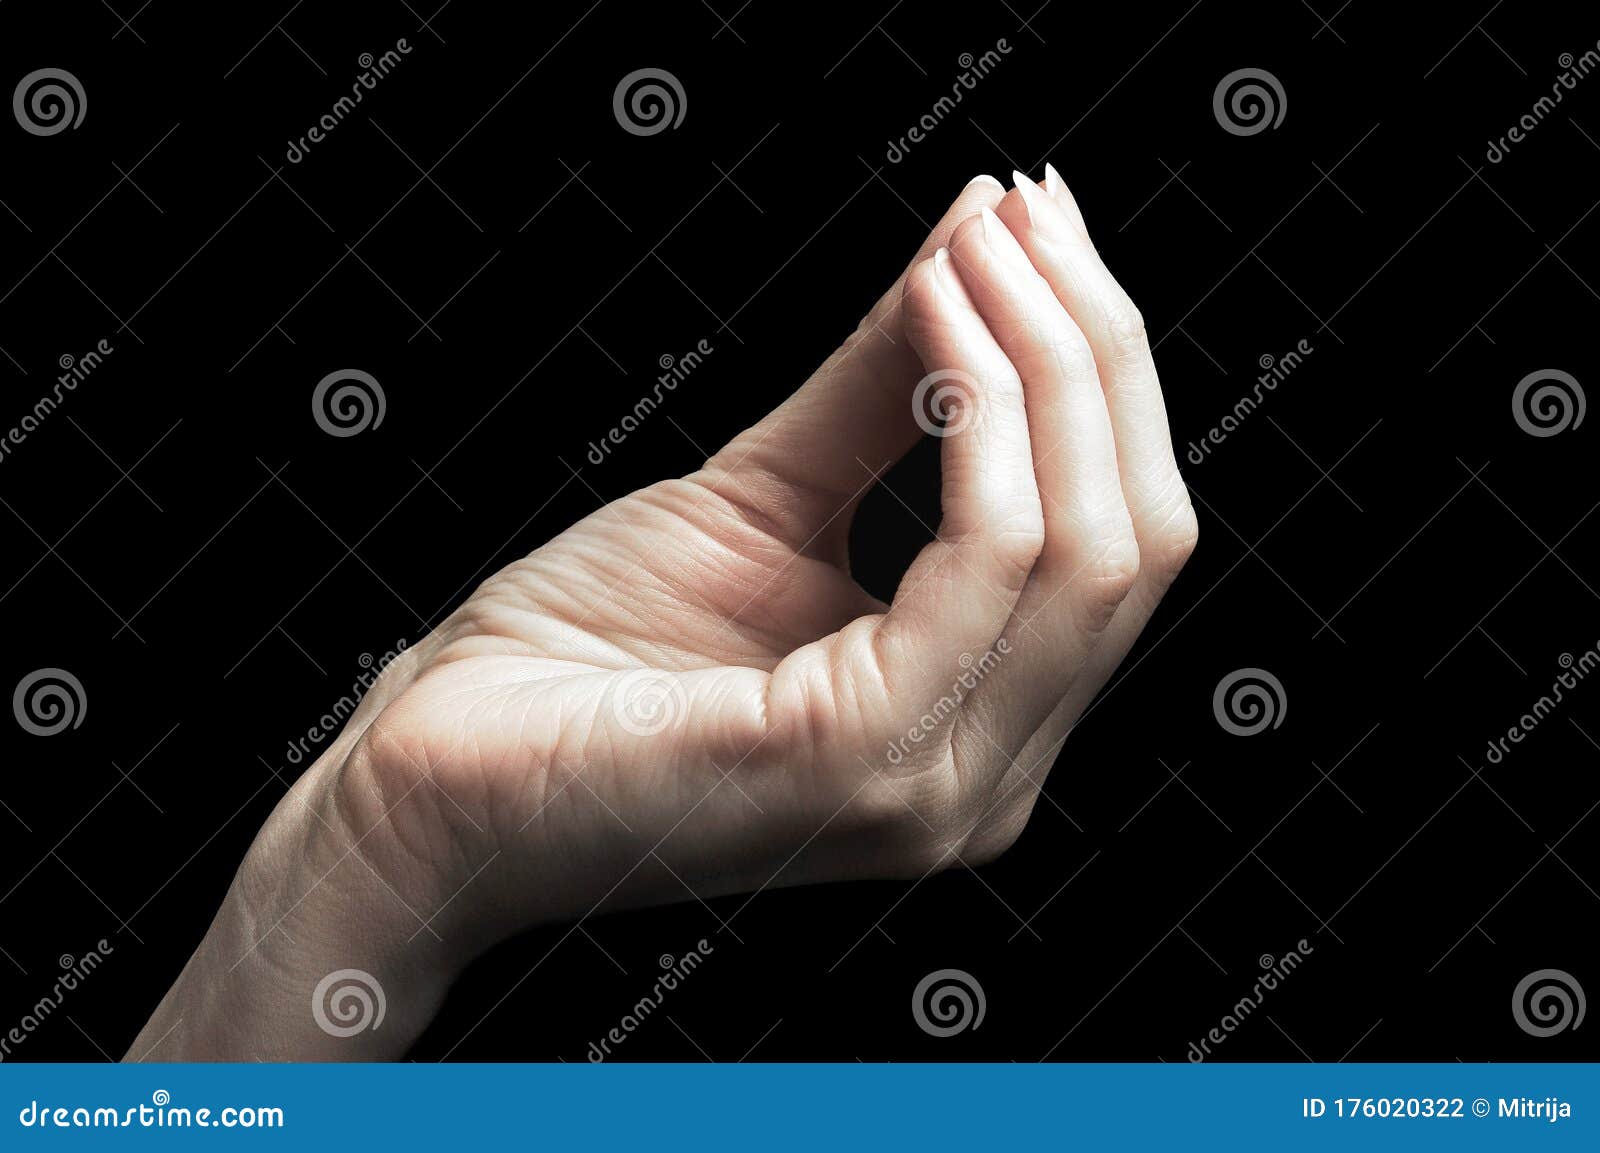 Fingers all together gesture meaning “What do you really want? What do you  mean?” in Italy, but 